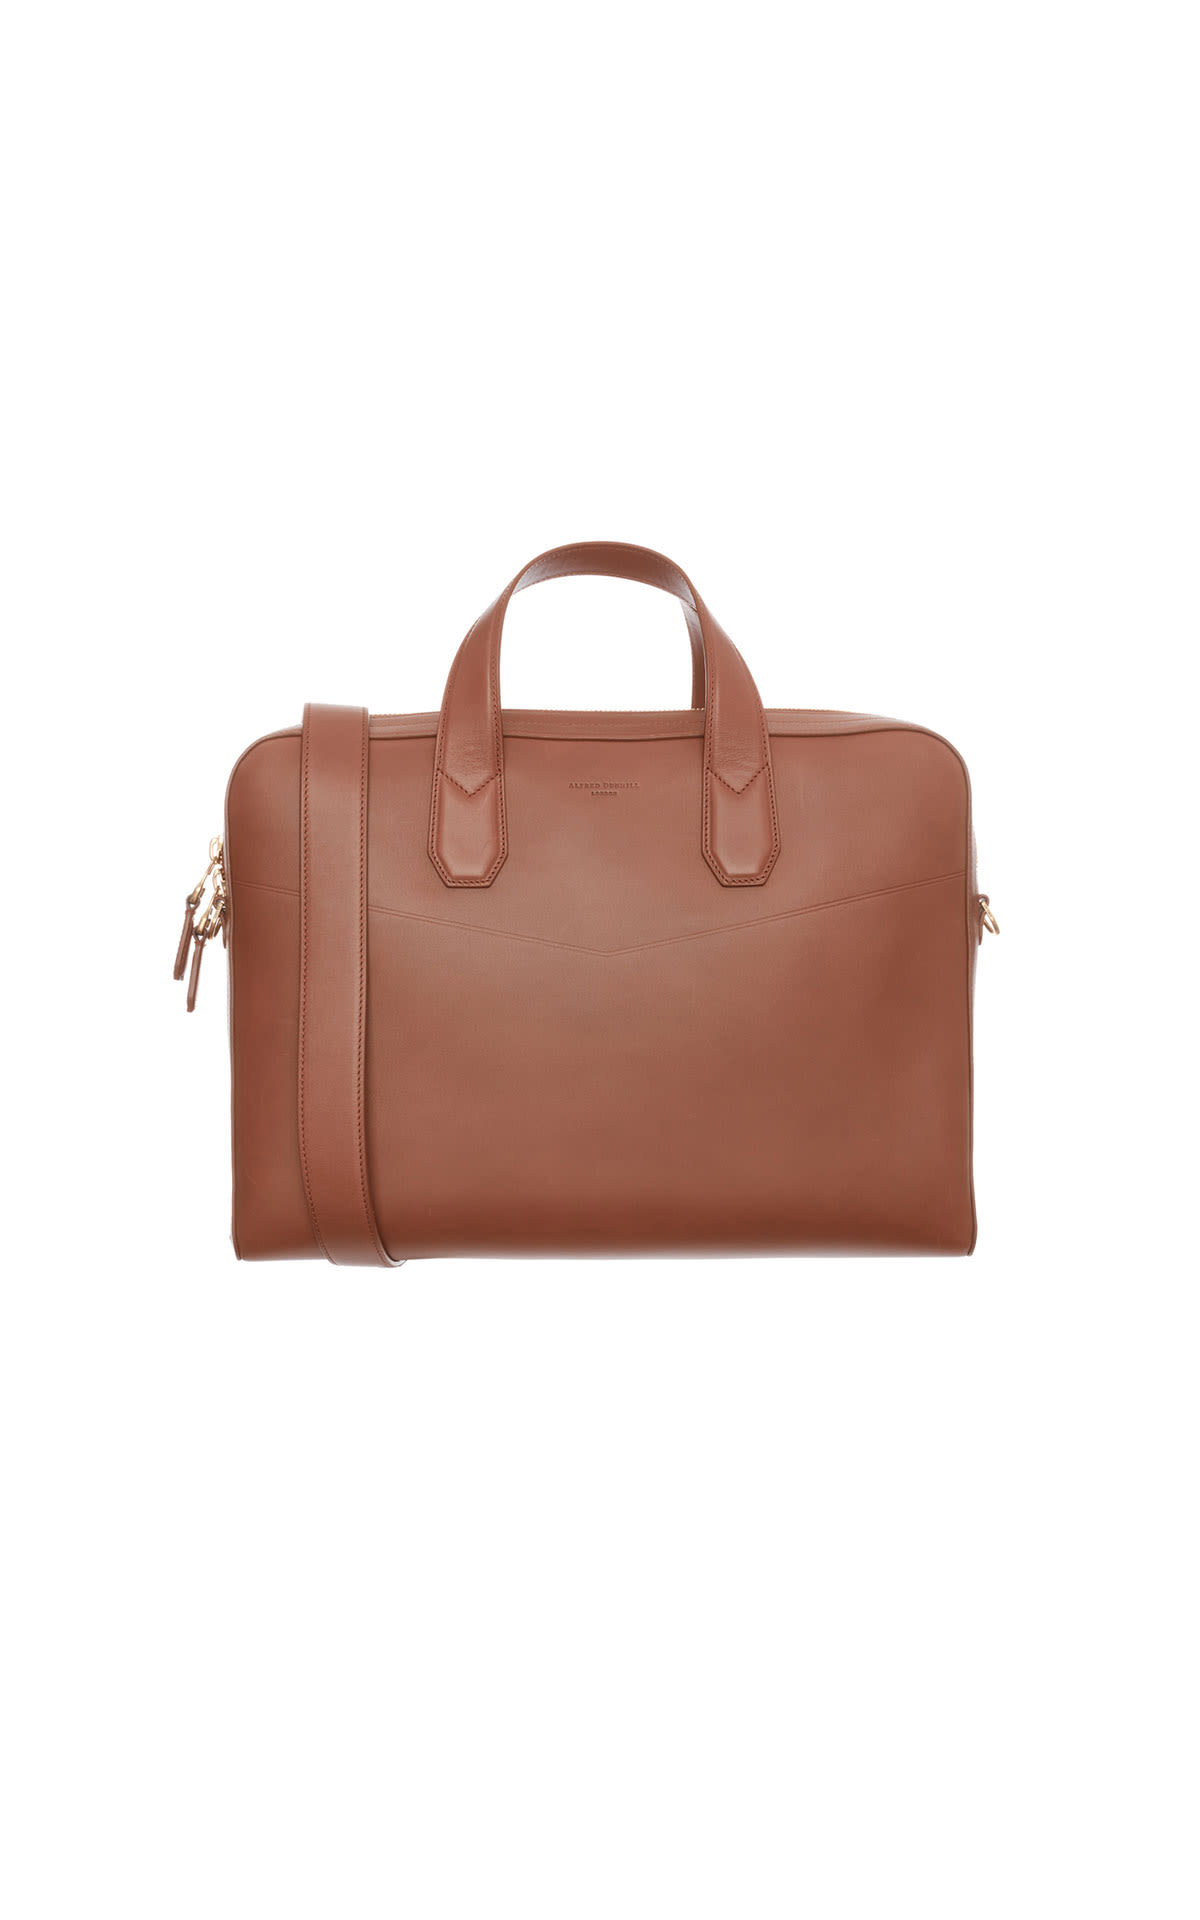 Dunhill Duke briefcase  from Bicester Village